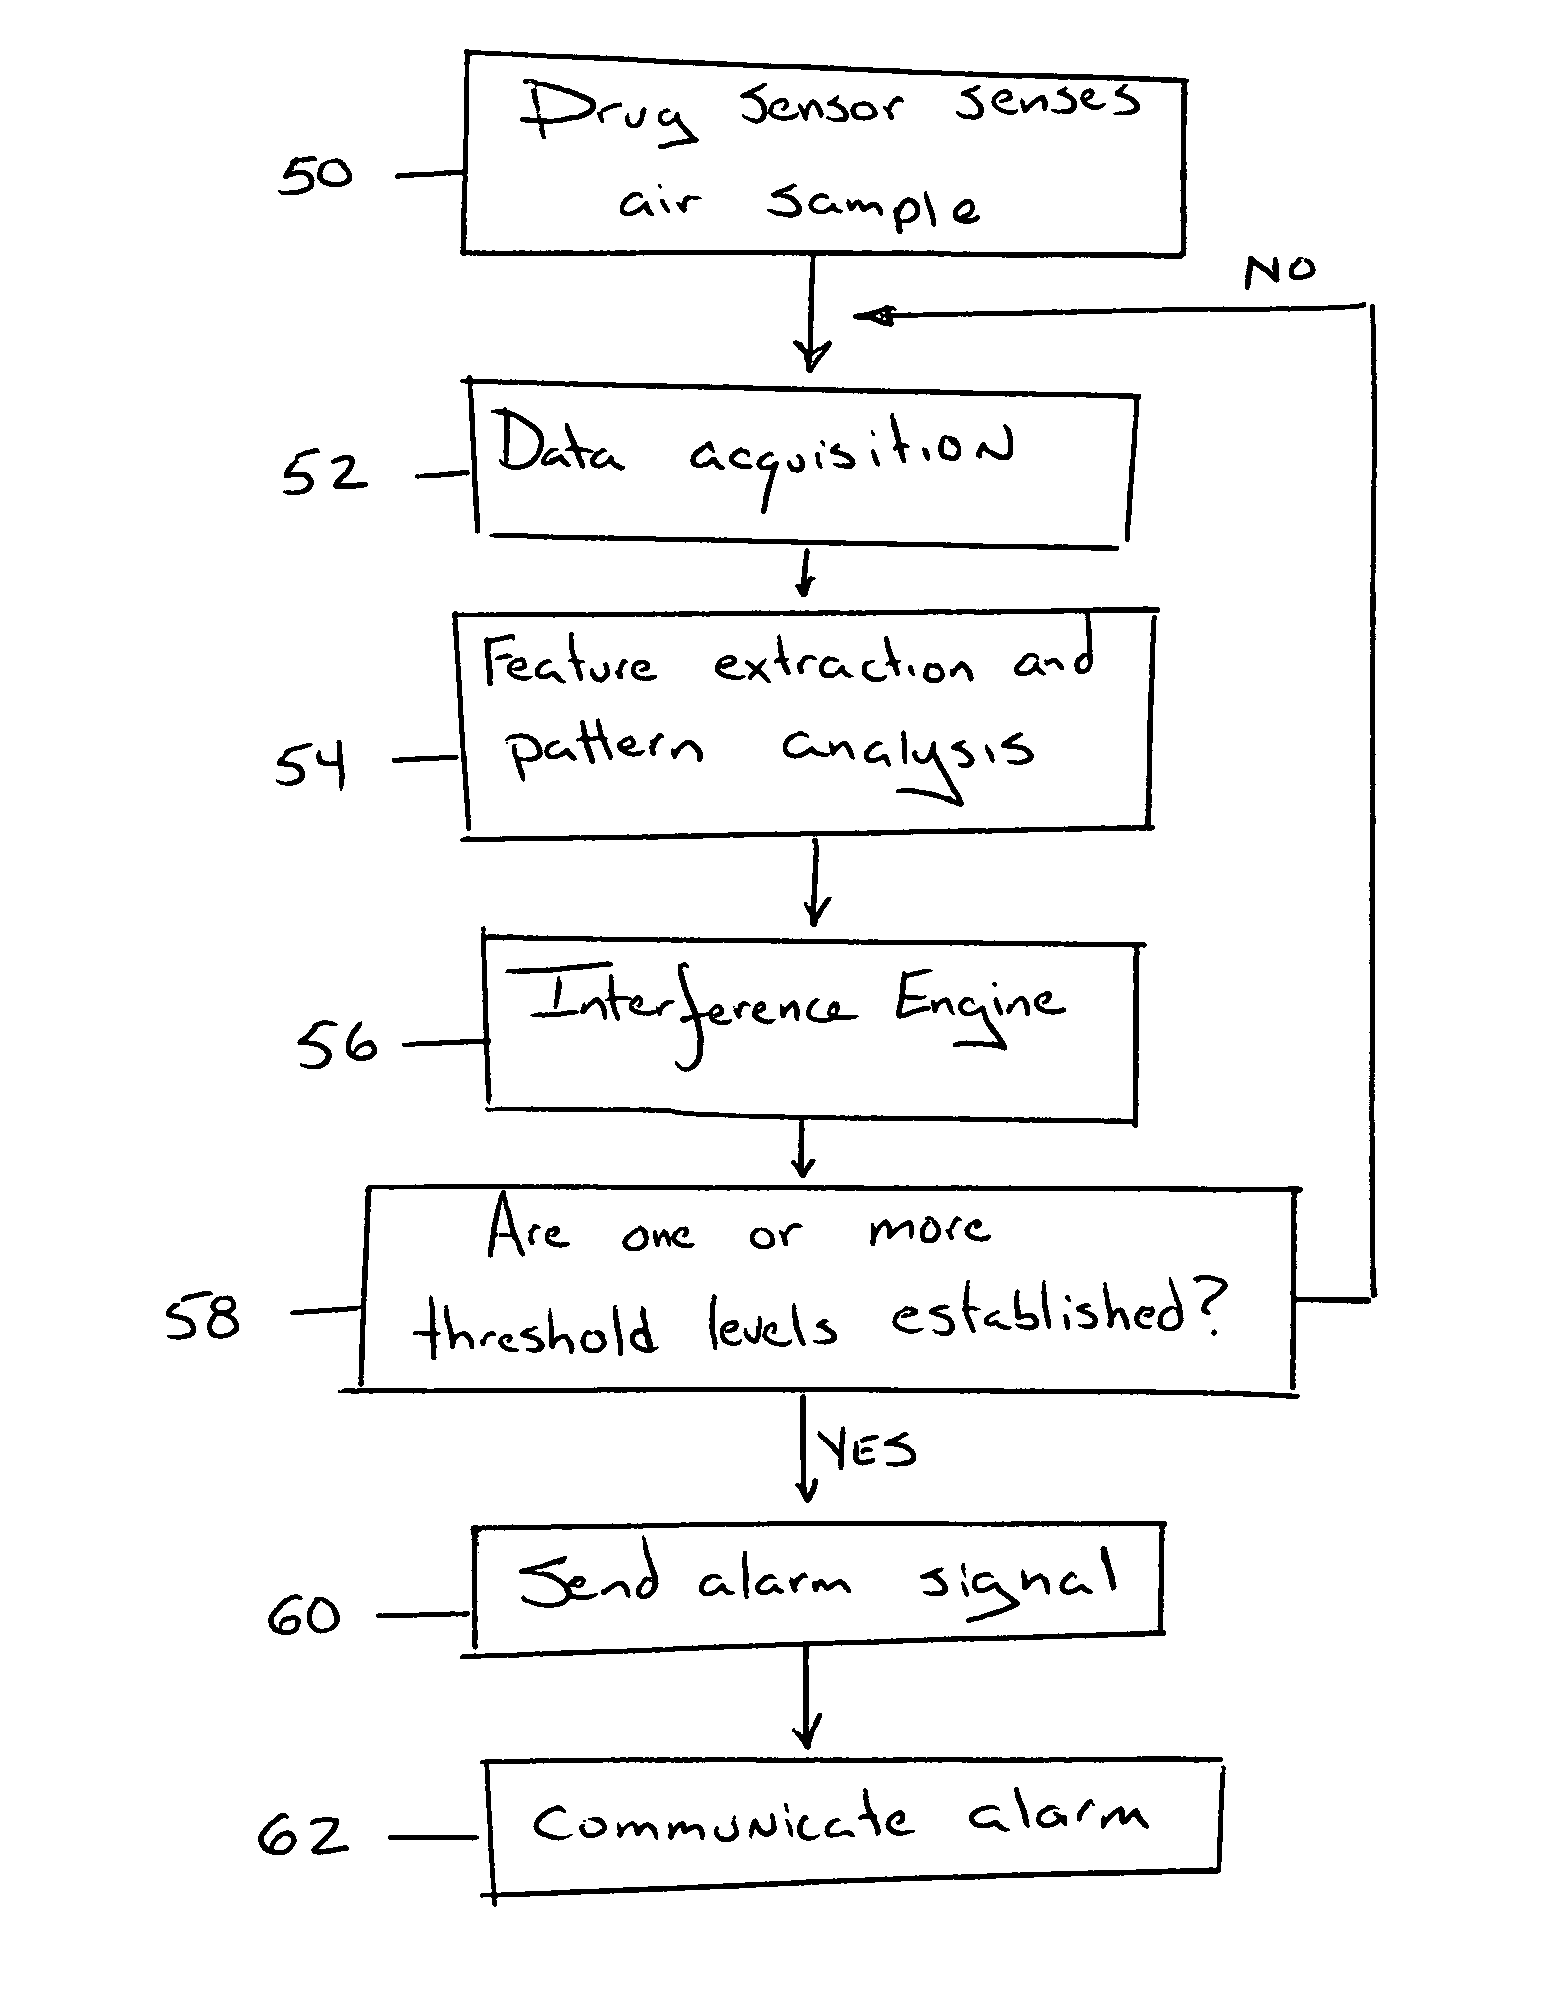 Illegal drug detector and method of its use